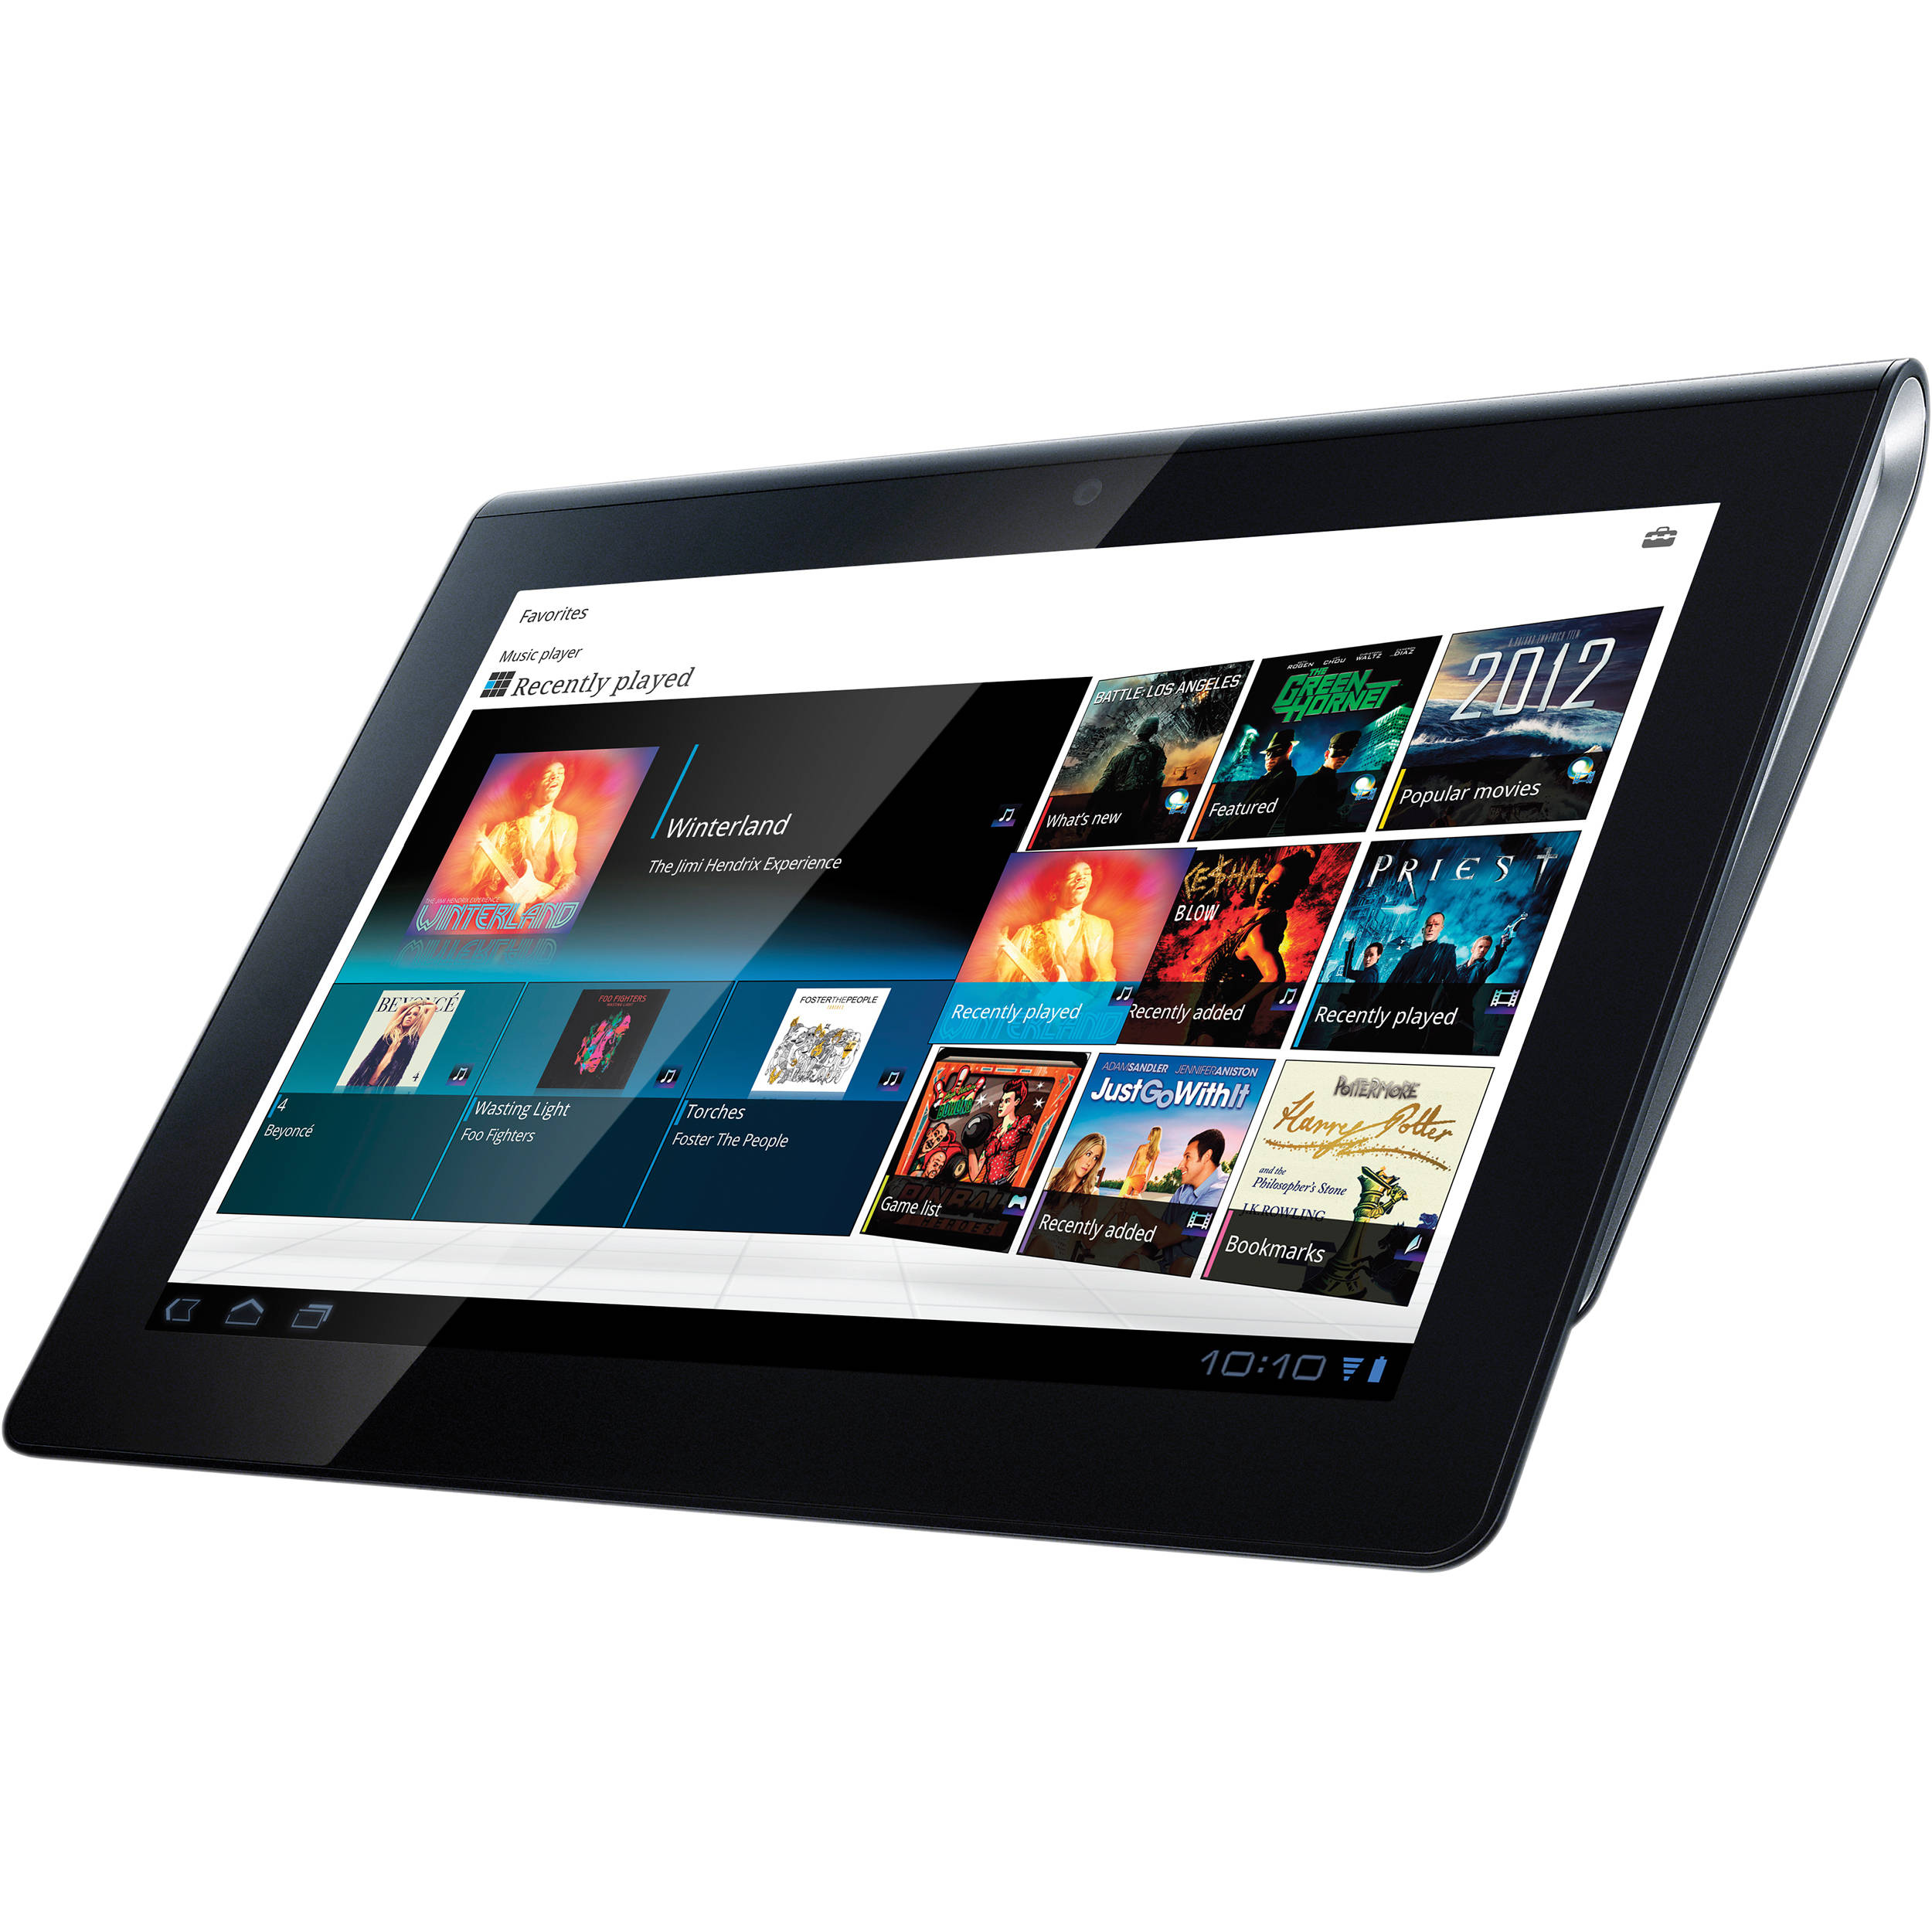 Sony S Tablet